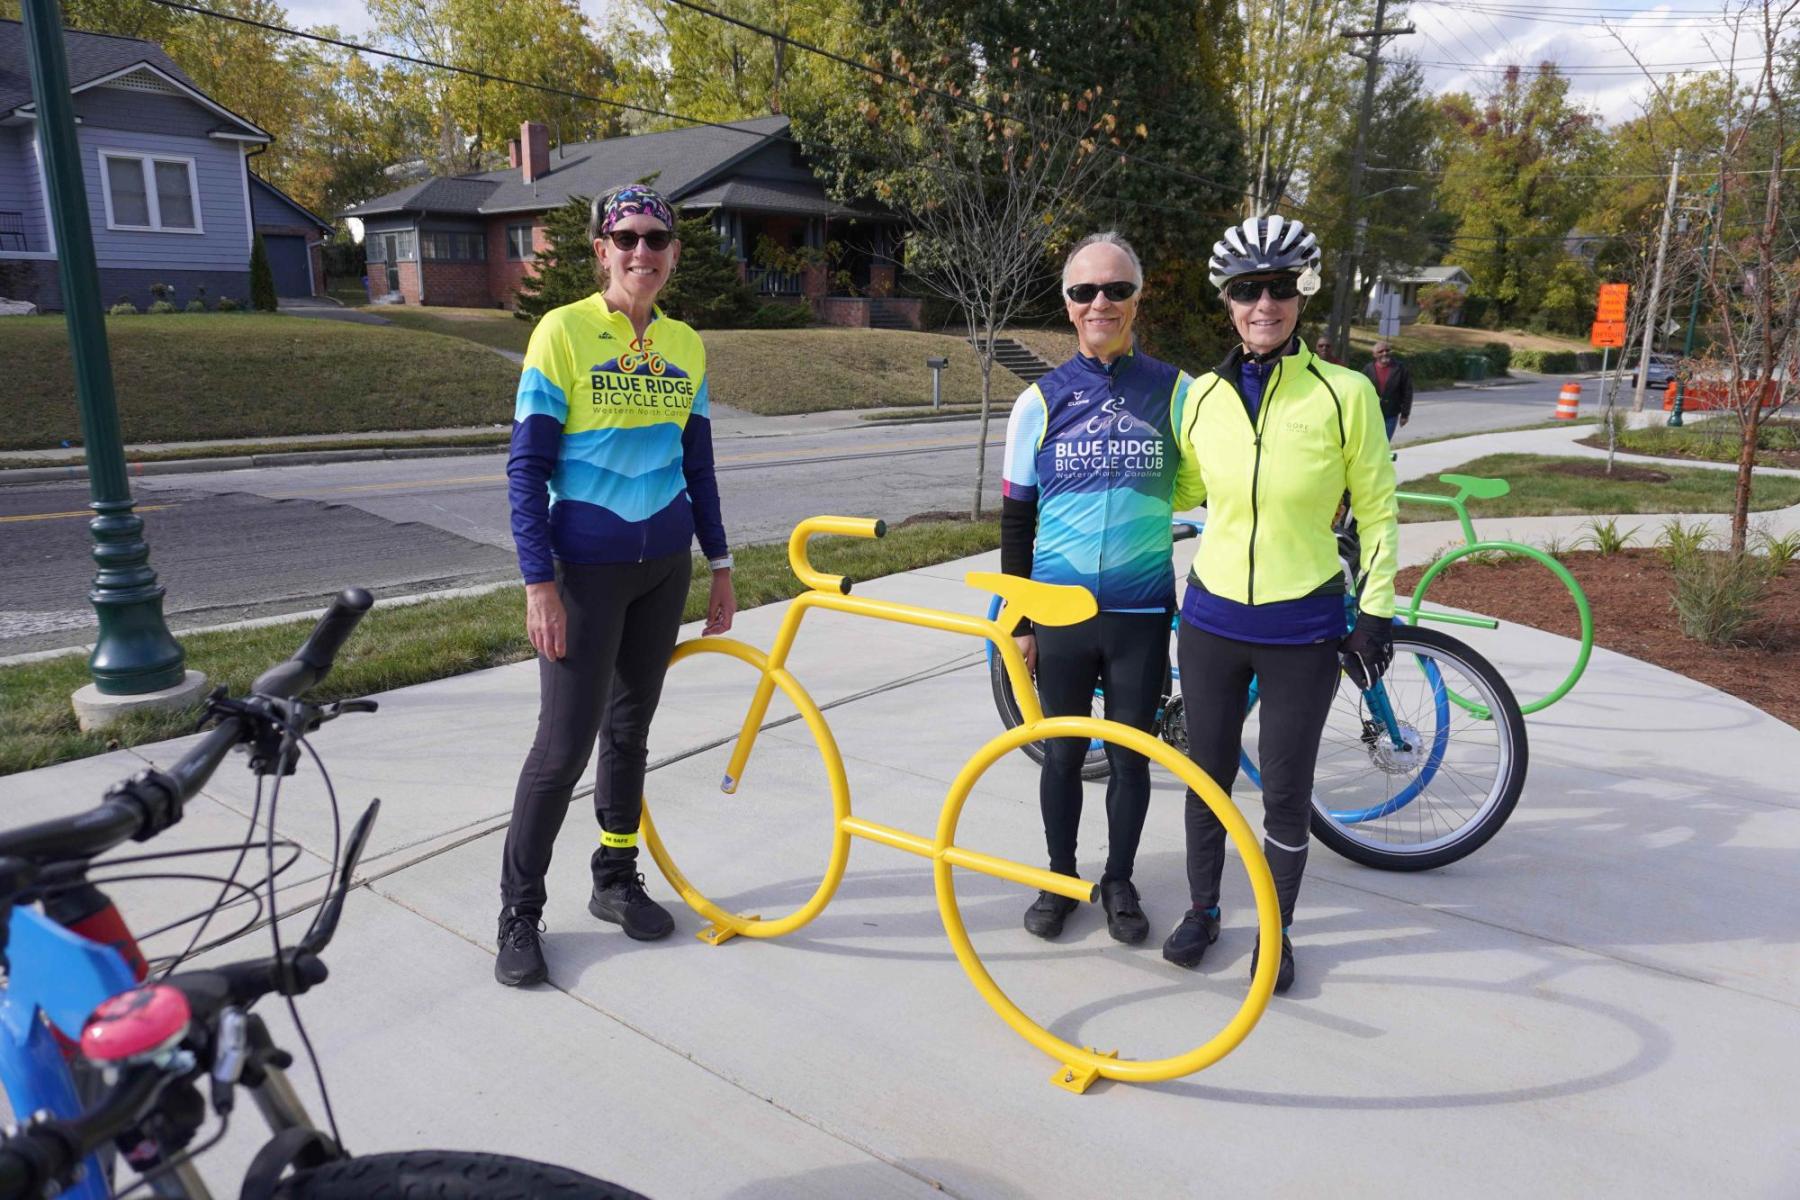 3 people standing next to colorful bike racks made possible by the Blue Ridge Bicycle Club